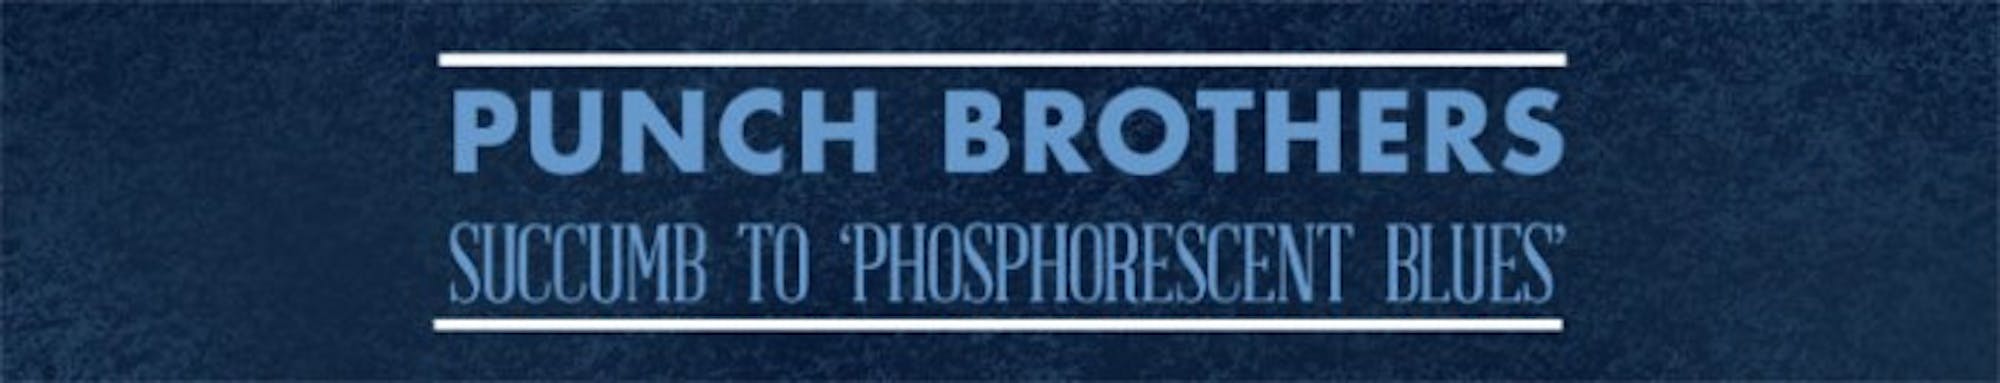 web_punch-brothers